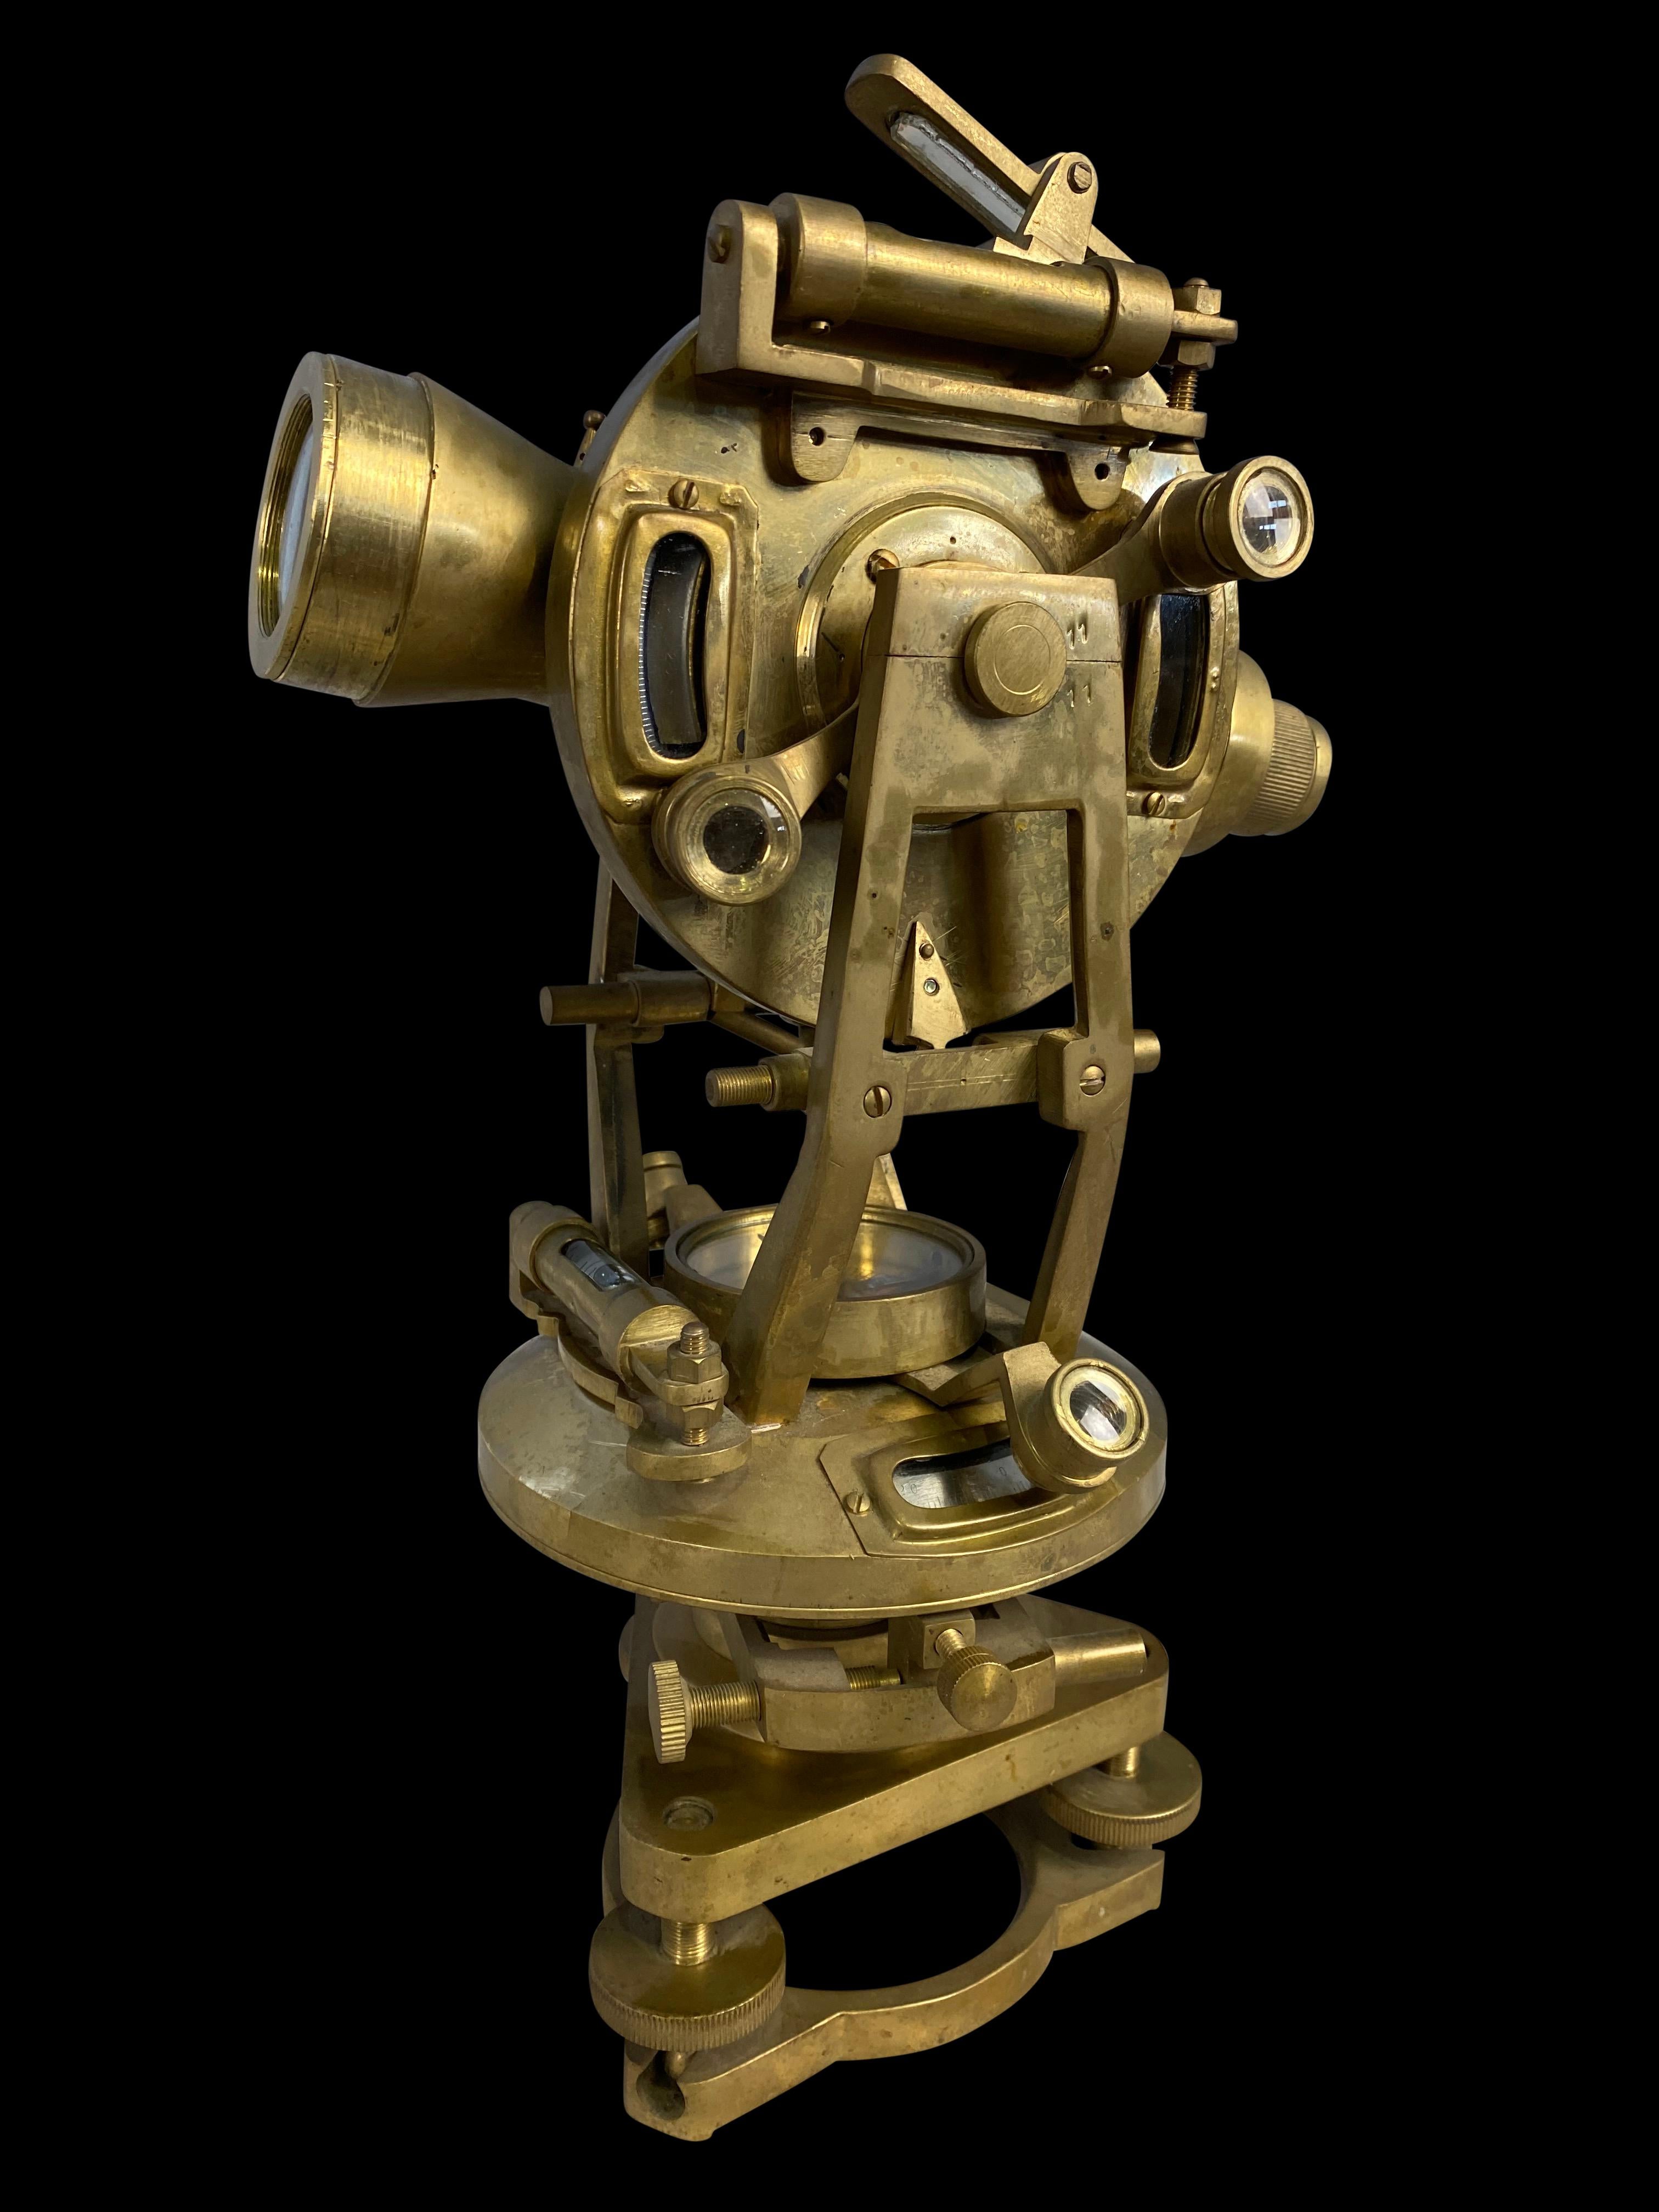 theodolite is an instrument used for